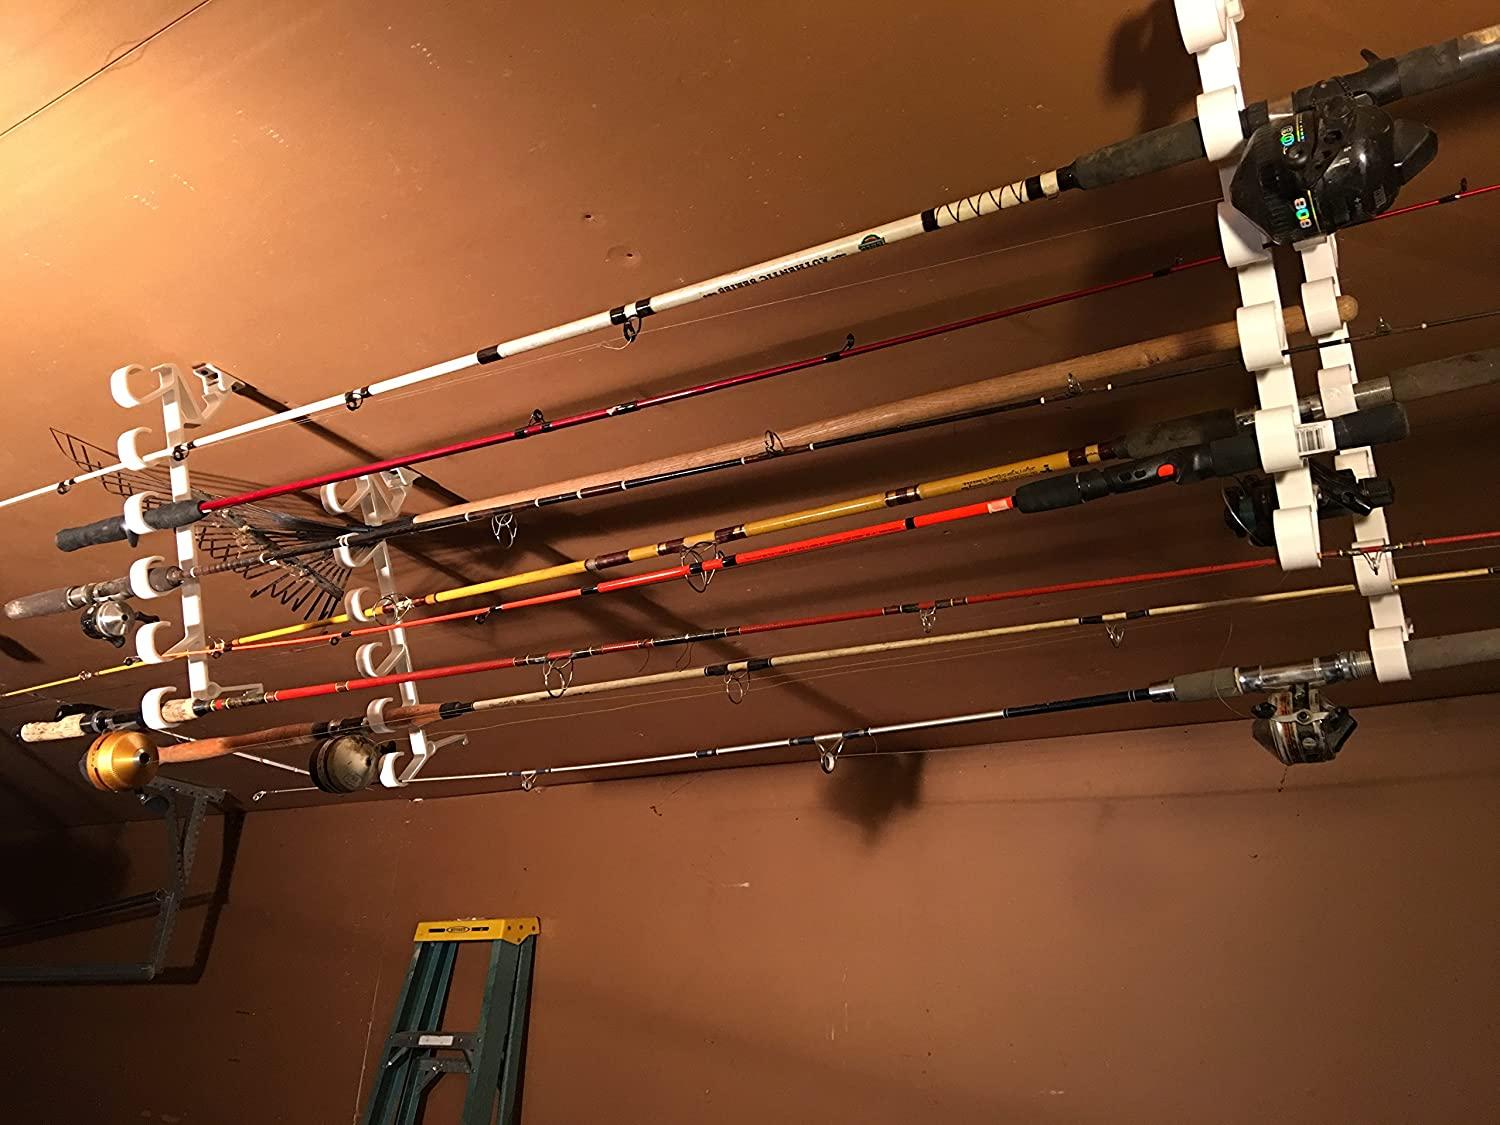 Garage Storage Rack for Garage Doors with Hooks for Fishing Rods